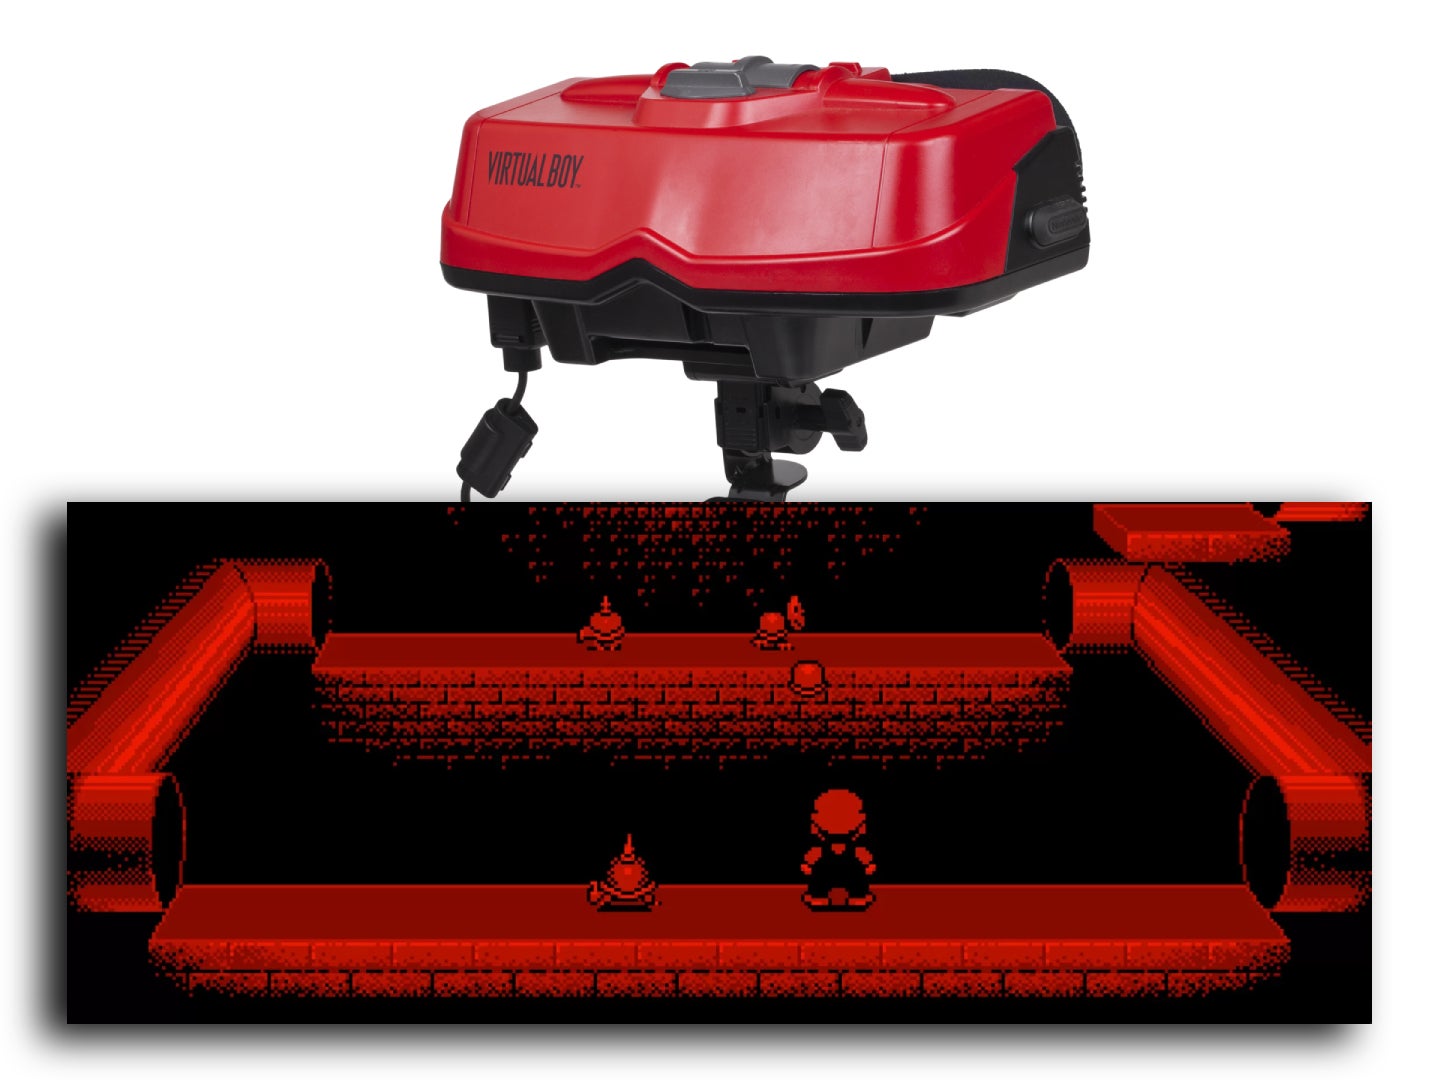 Ladies and gents, the Virtual Boy in all of its monochrome glory. - Nintendo and Google should absolutely make a VR headset, because that will help the Vision Pro. Hear me out!